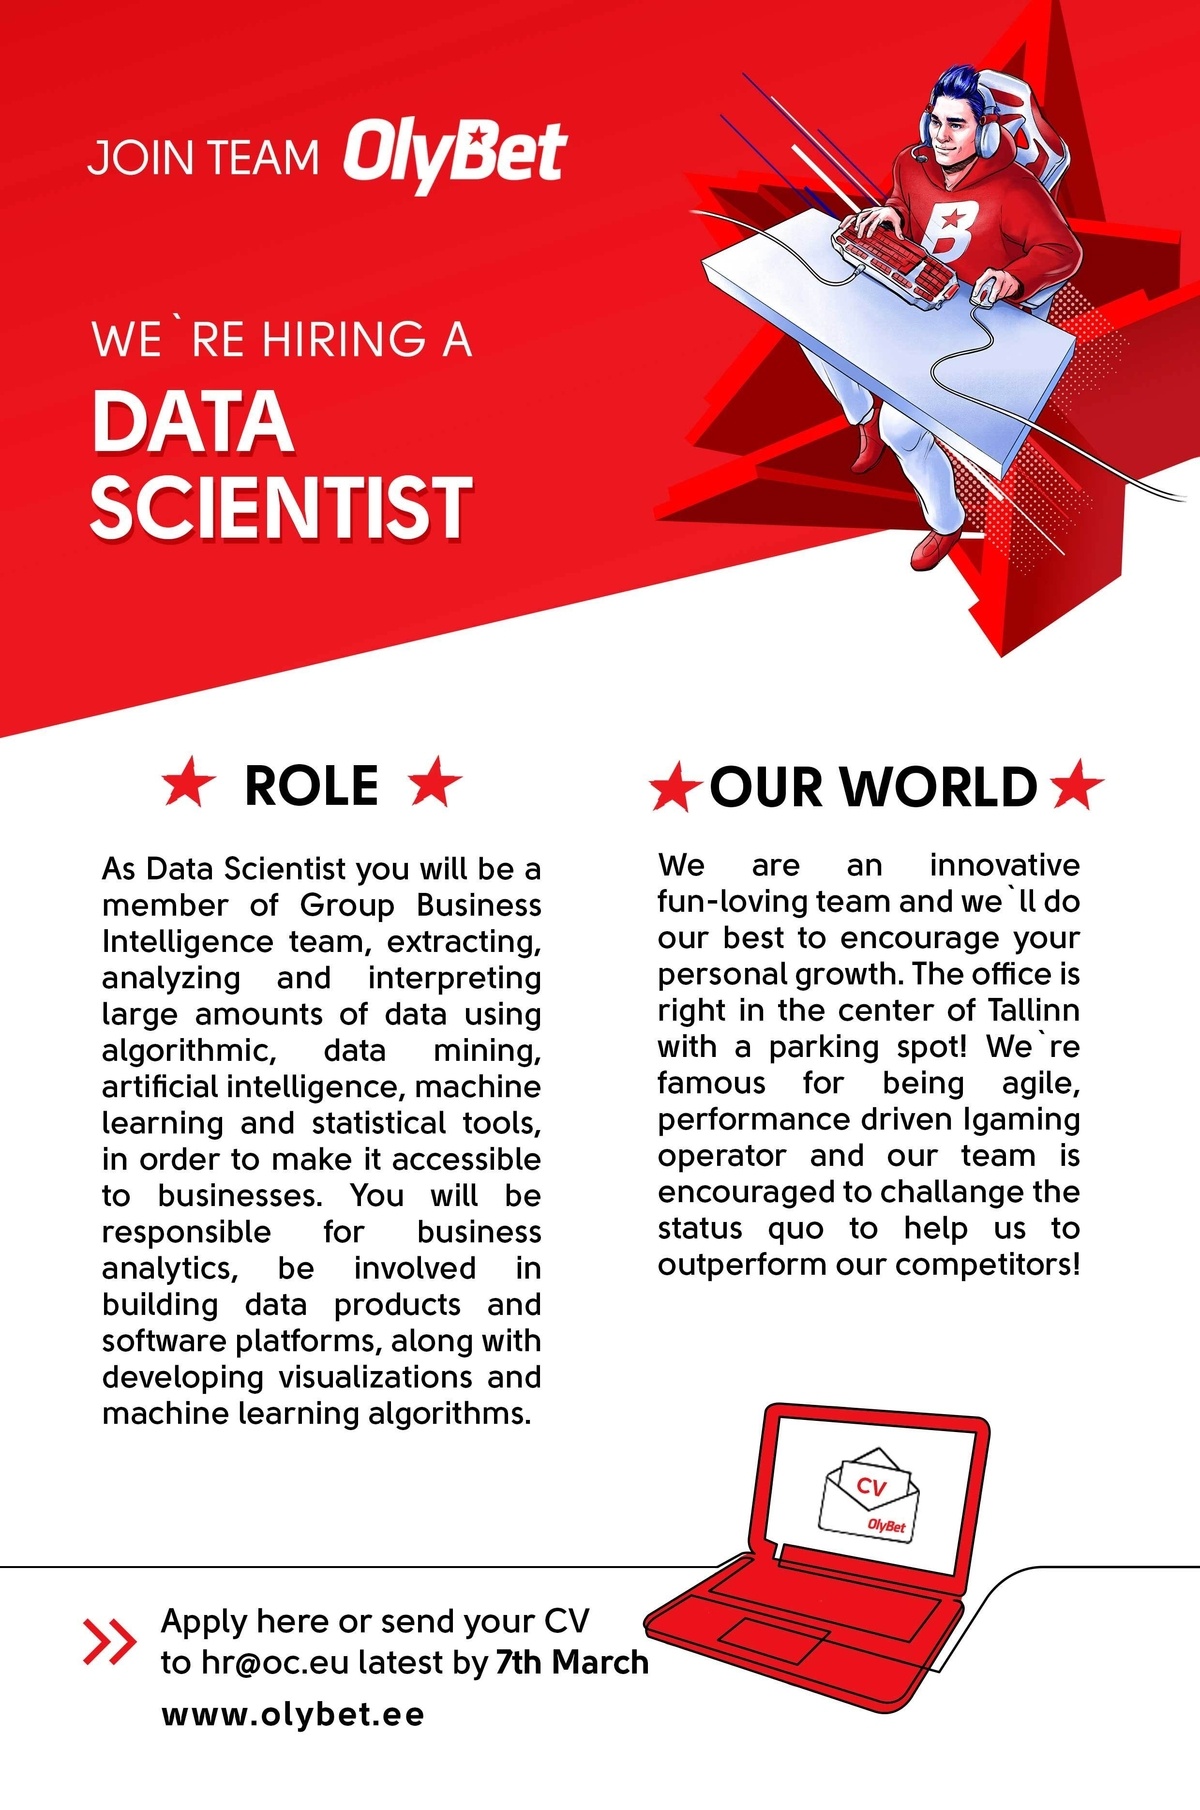 OLYMPIC ENTERTAINMENT GROUP AS Data Scientist